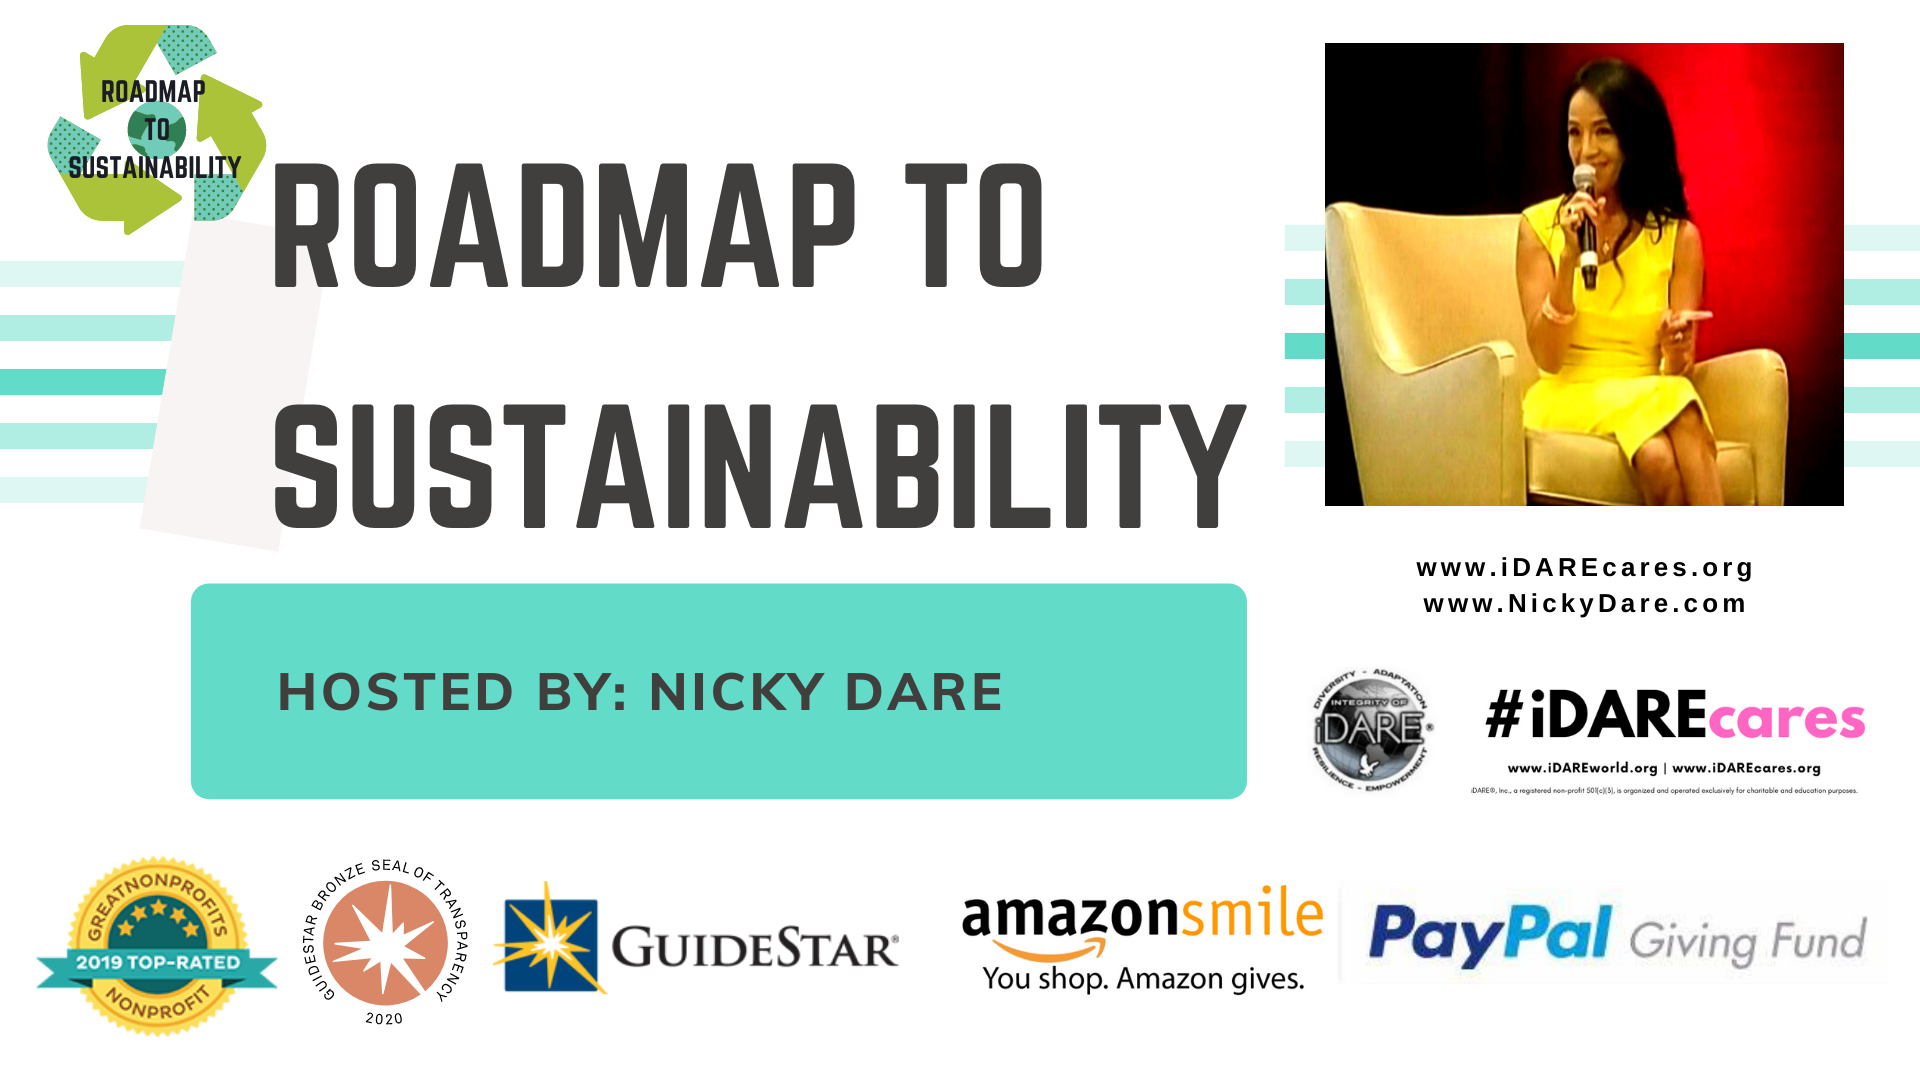 Nicky Dare to Host 8th Global Roundtable on Roadmap To Sustainability and Our Future